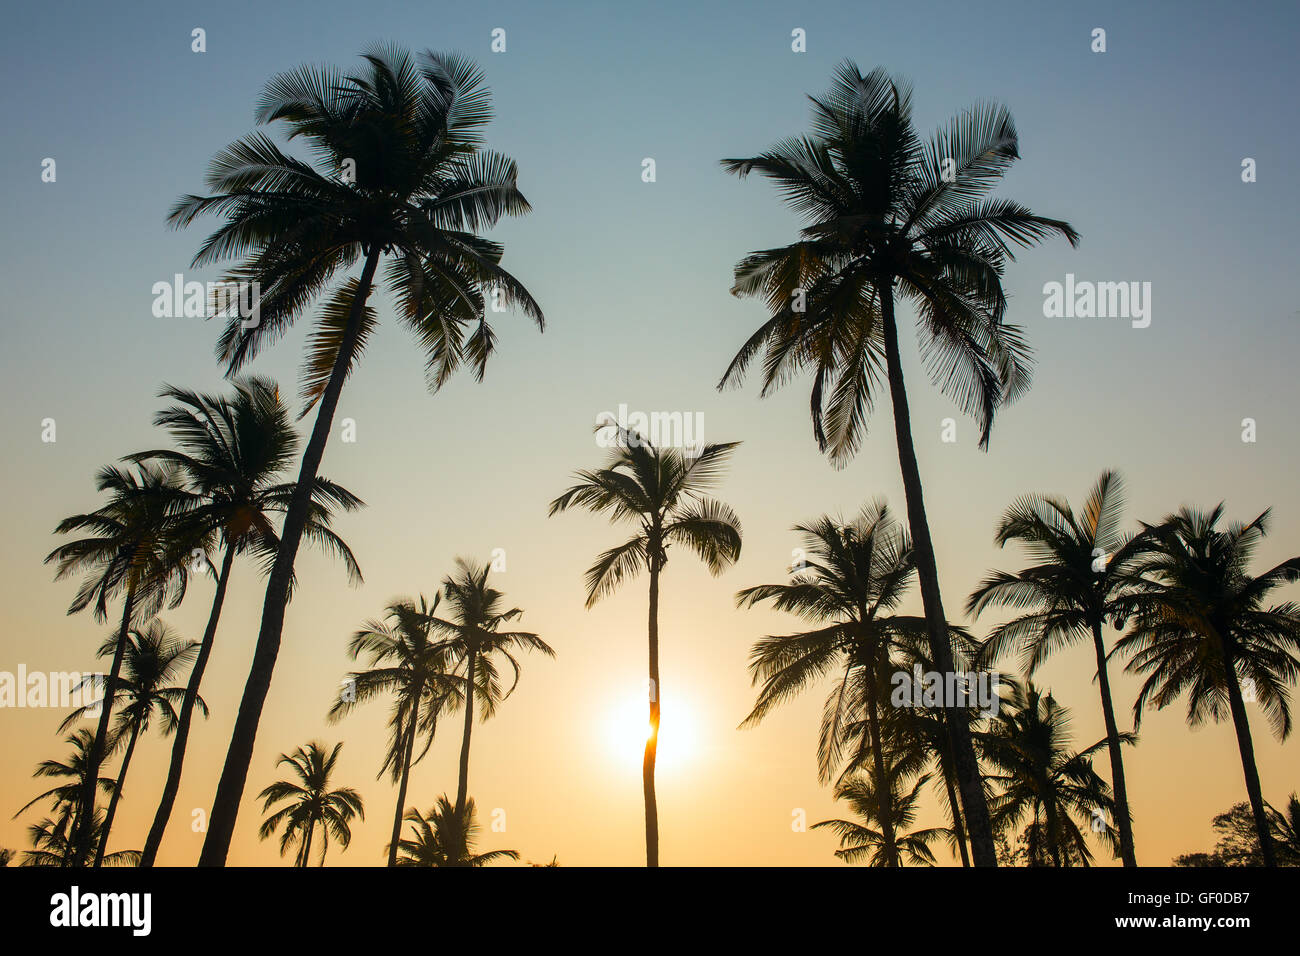 Palm trees silhouette at the sunset, India Stock Photo